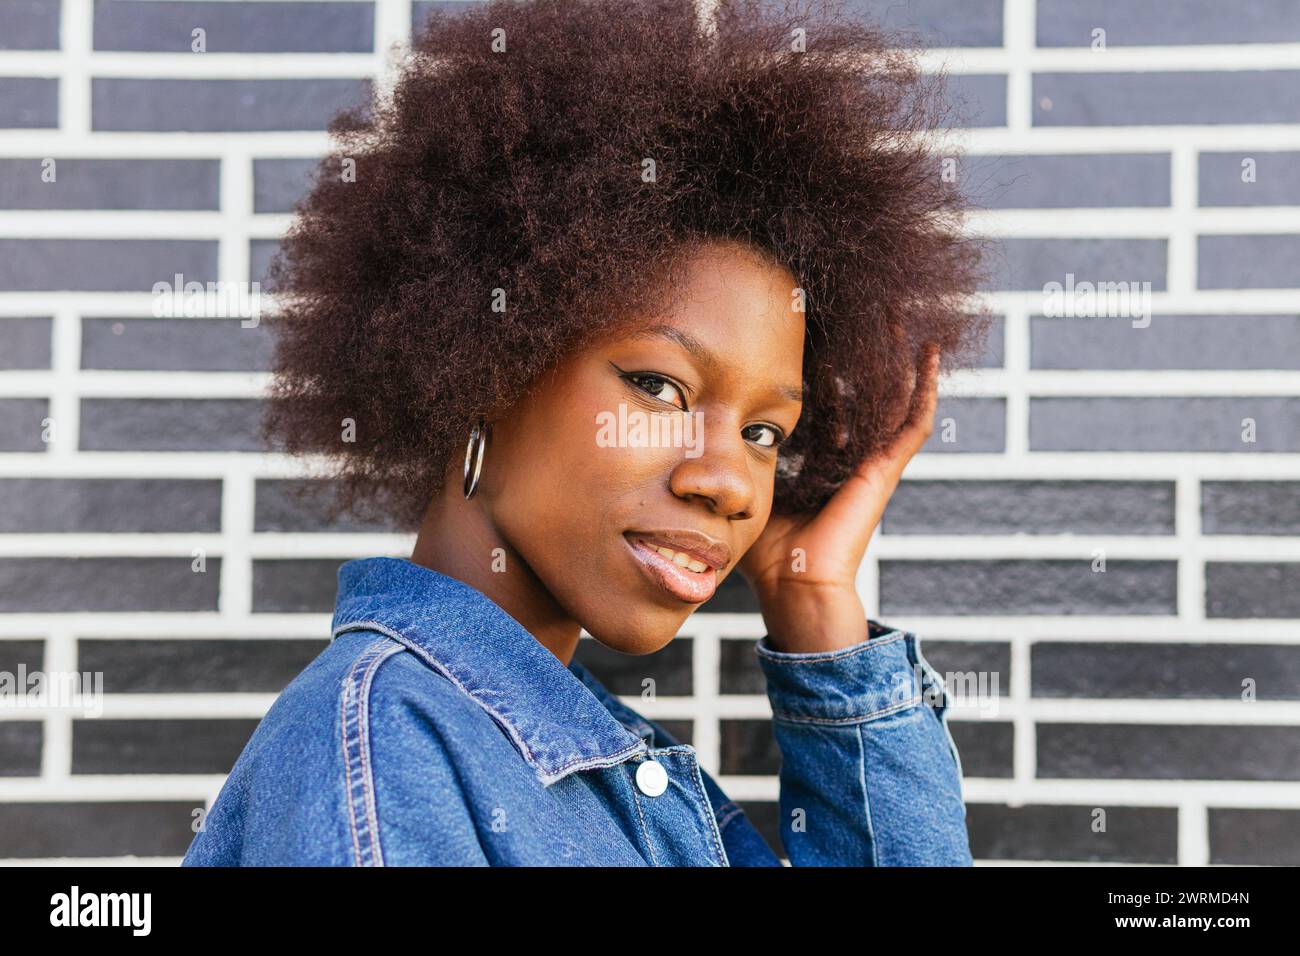 Stylish African American woman gives a confident side glance, her natural hair contrasting with the graphic urban brick wall behind her Stock Photo